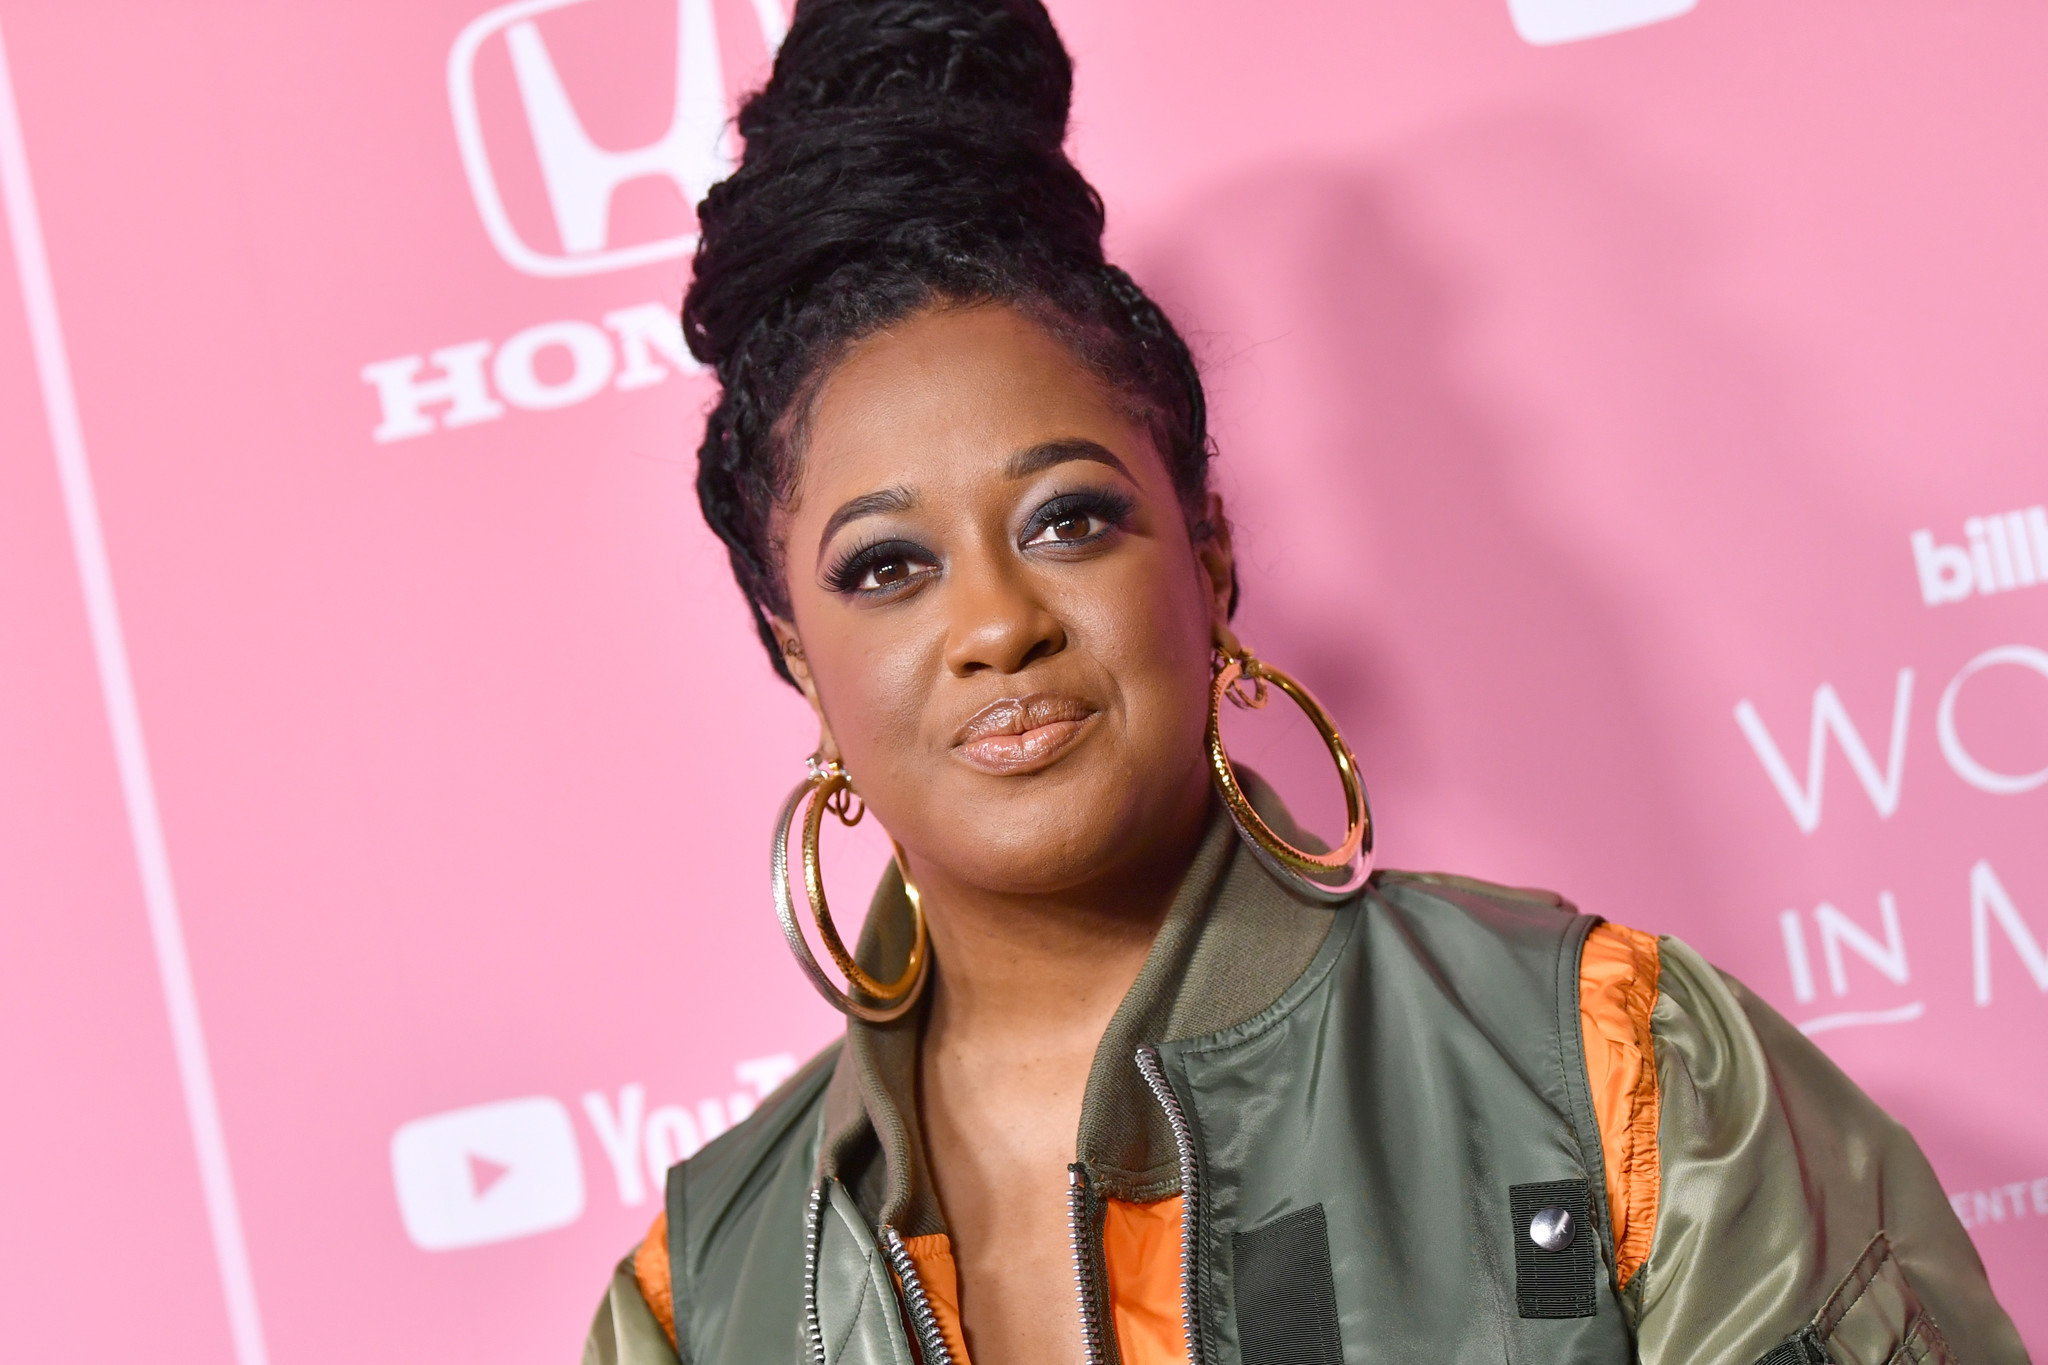 Grammy-nominated rapper Rapsody’s ‘Eve’ album to be taught at North Carolina and Ohio State universities this fall